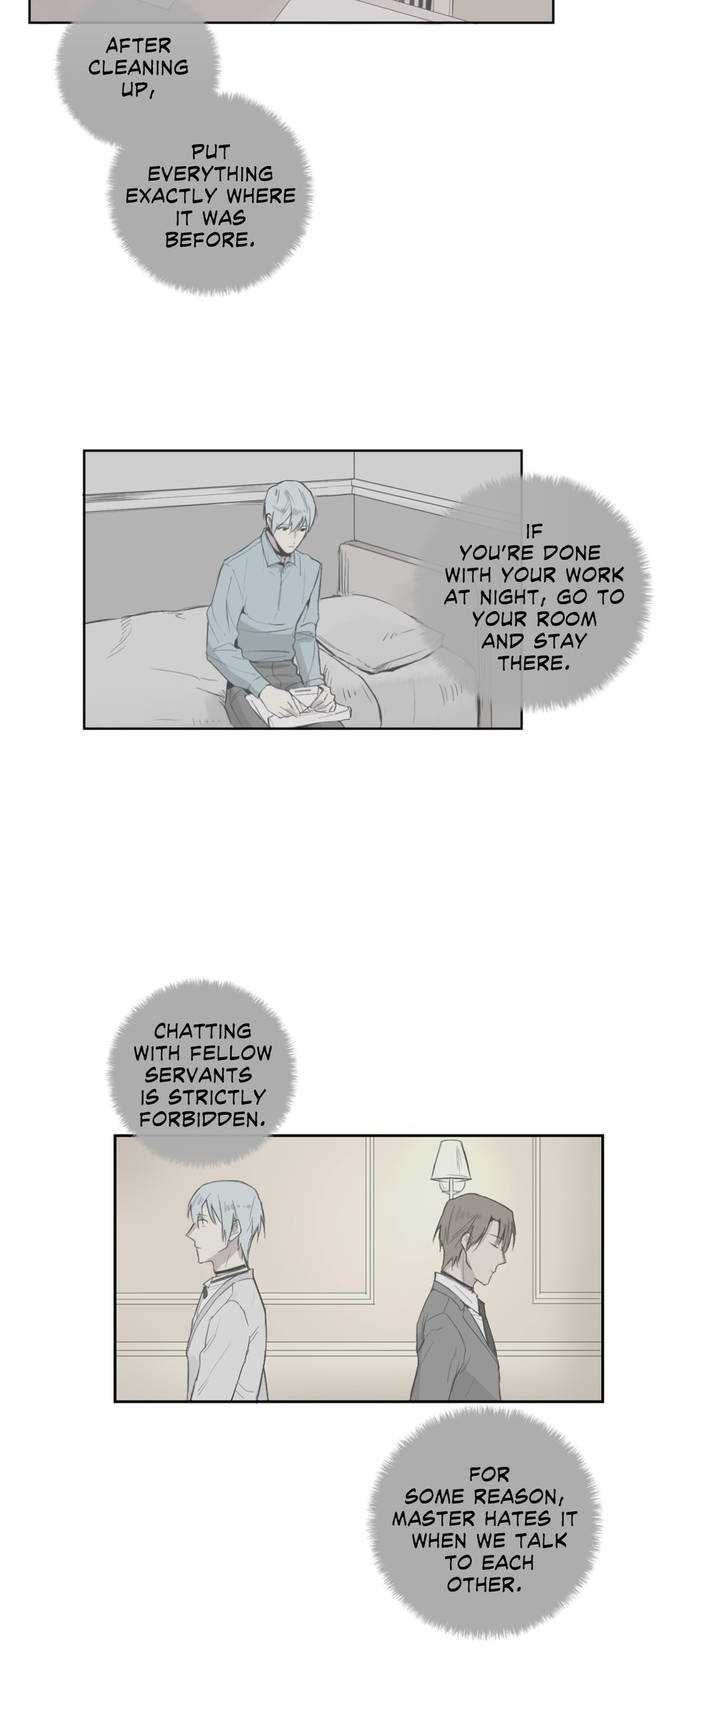 Royal Servant - Chapter 1 Page 15